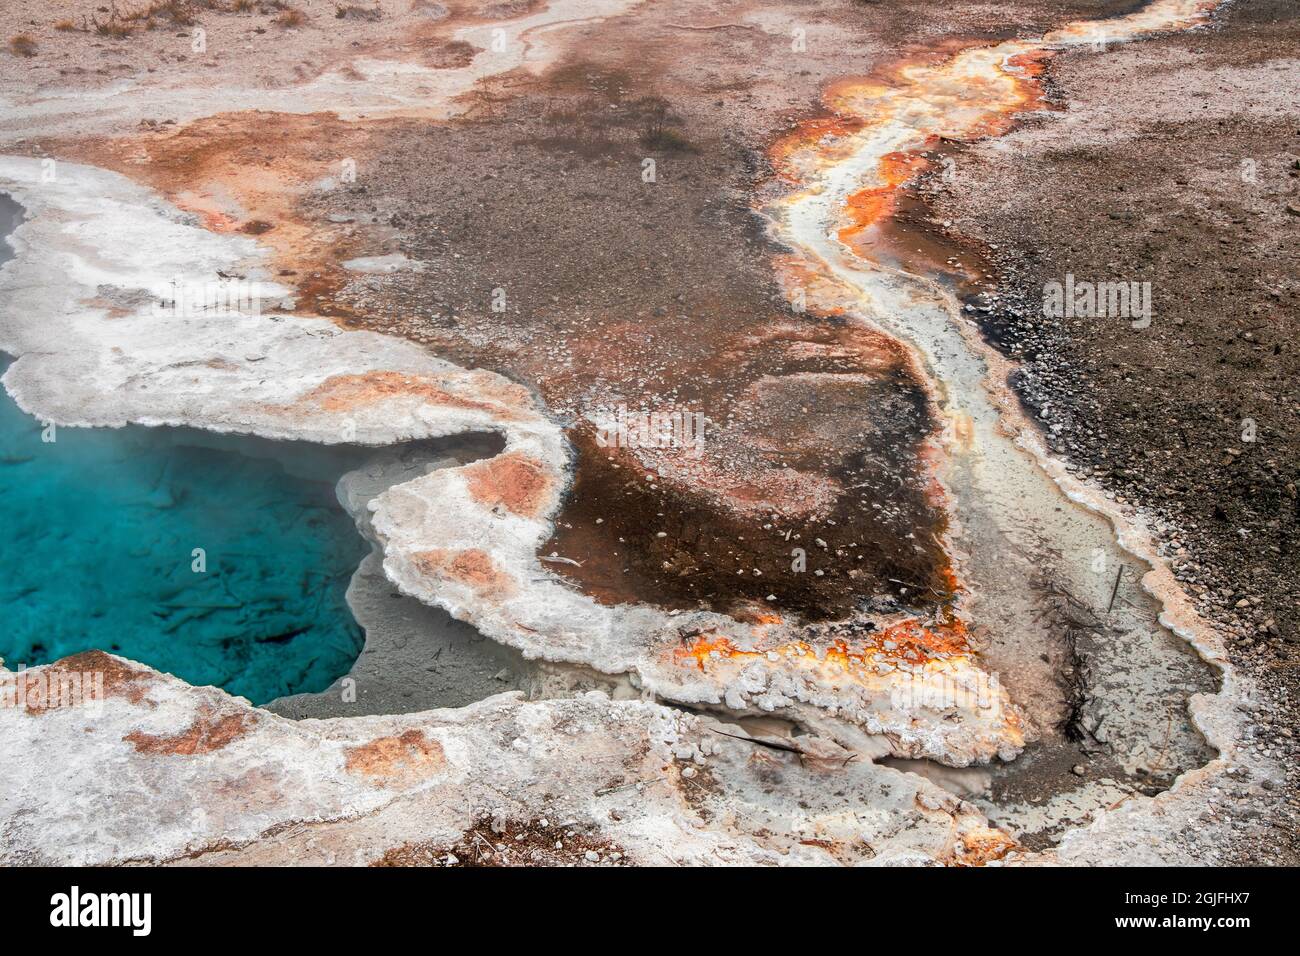 Blue star Spring, Upper Geyser Basin, parc national de Yellowstone, Wyoming Banque D'Images